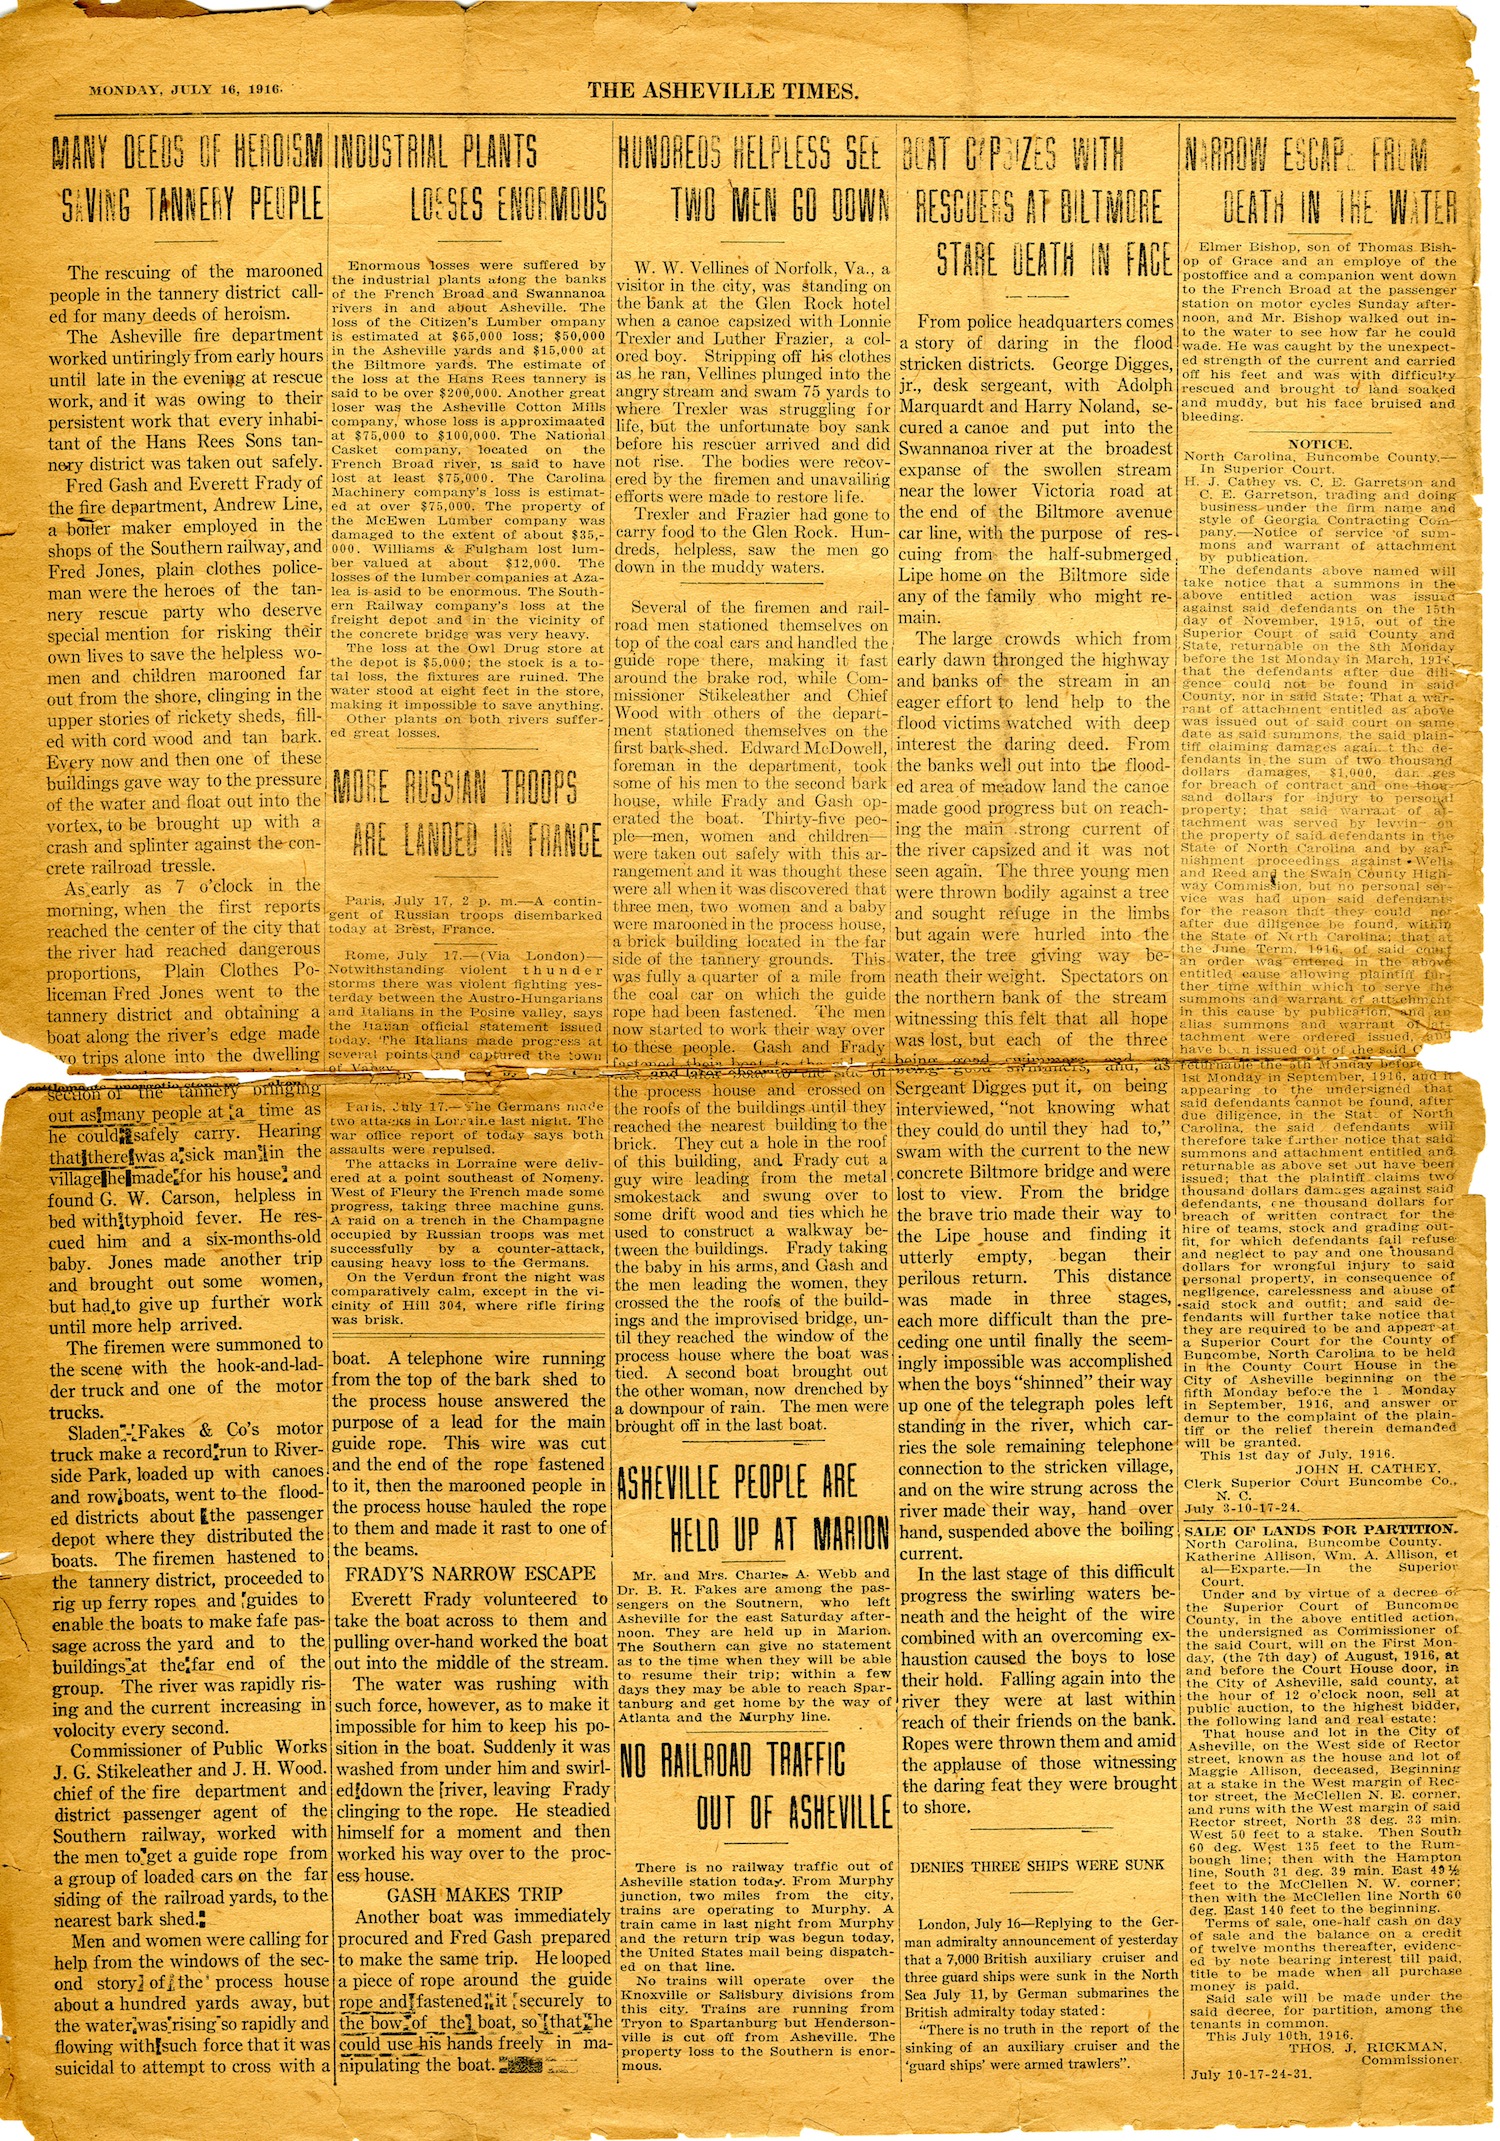 Asheville Times July 16, 1916 page 4